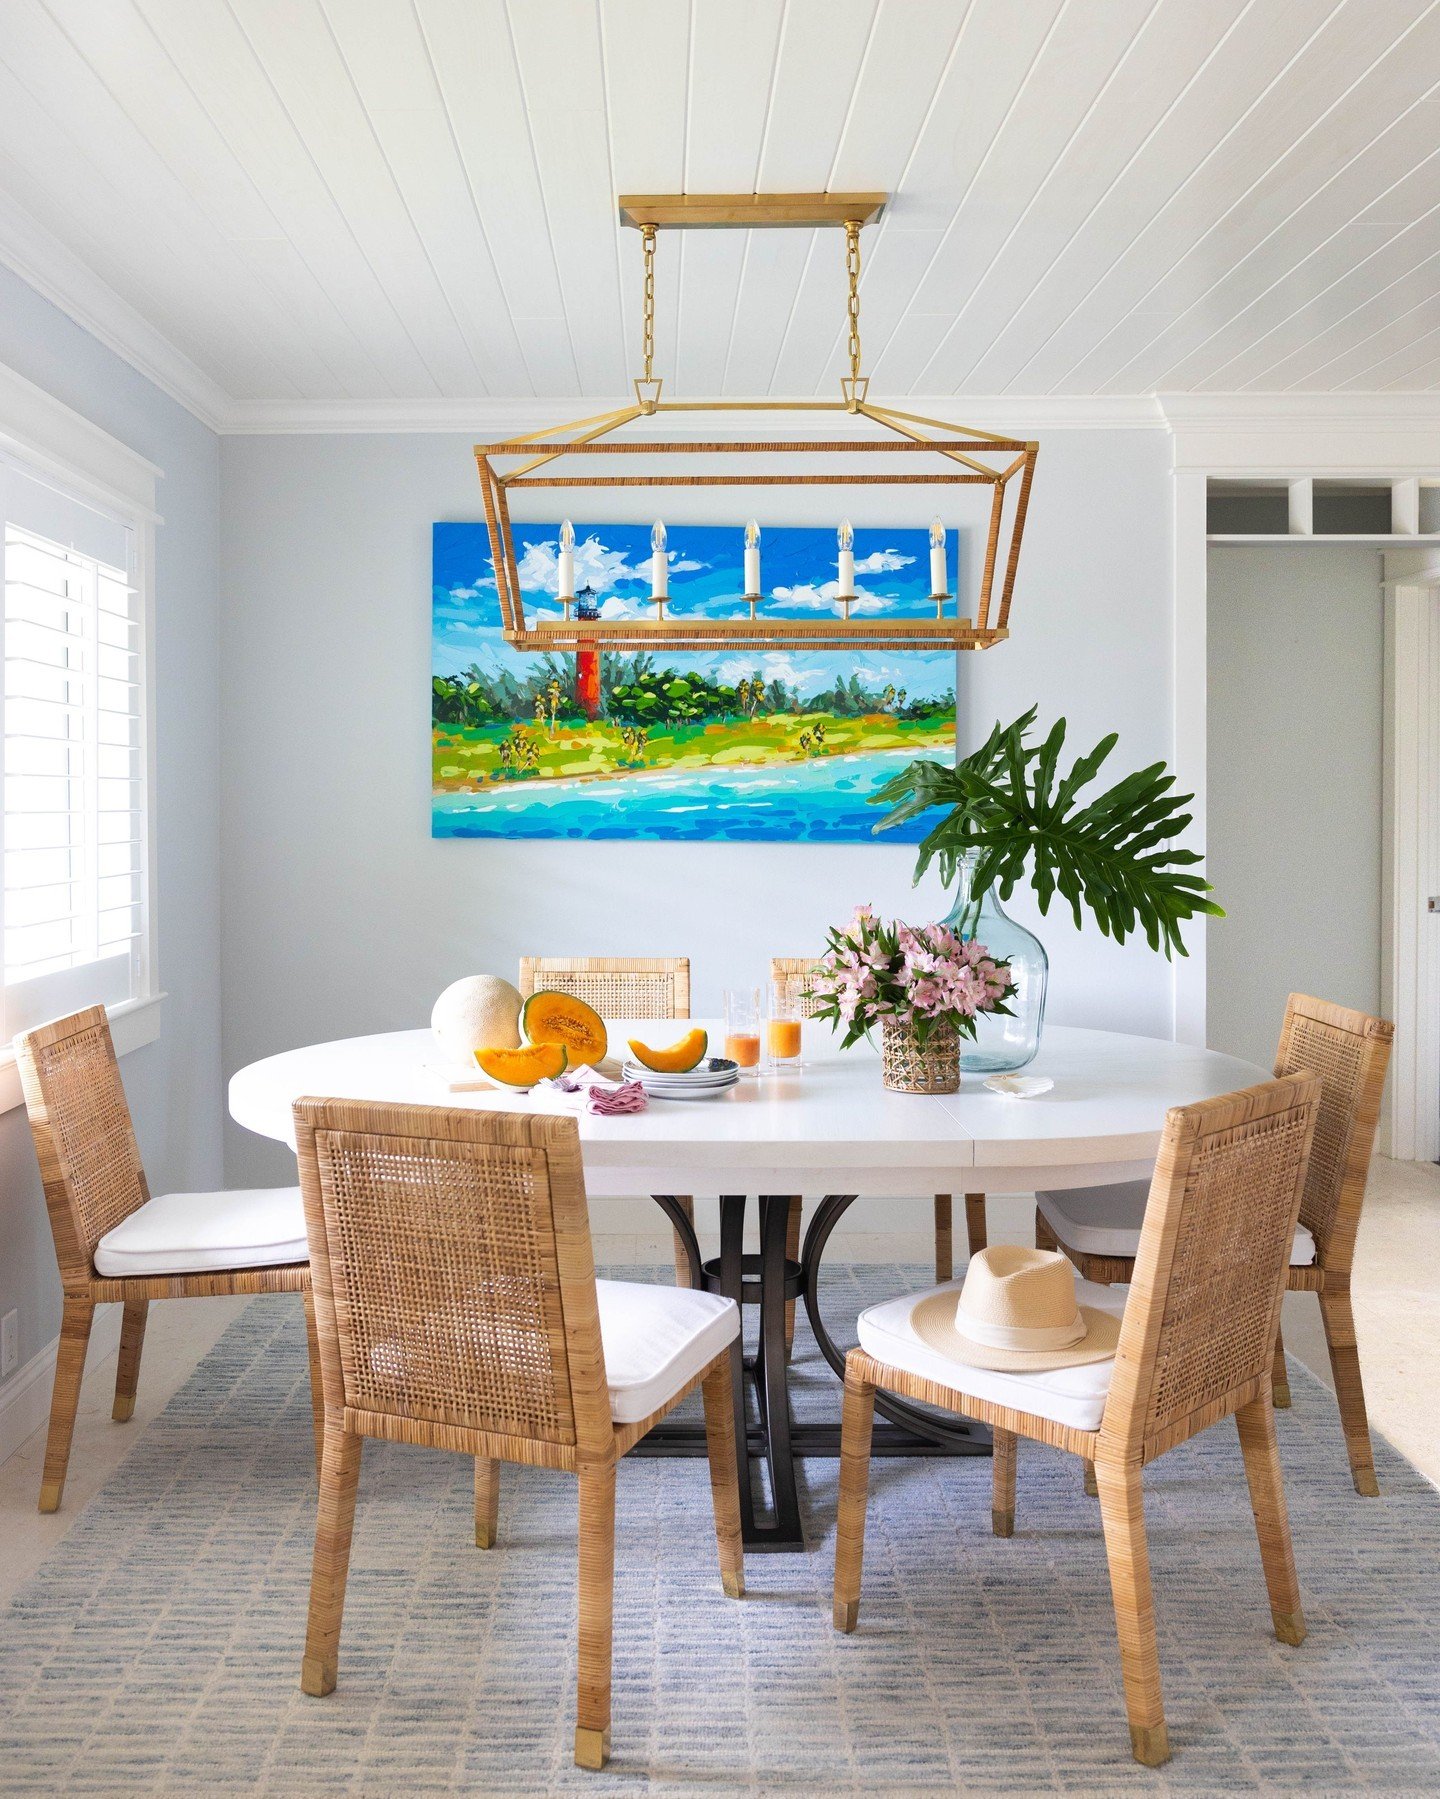 Dive into dining room dreams with a coastal splash of color! 🌊🎨 Transforming mealtime into a seaside escape, we're blending bright hues with beachy vibes for a space that's as vibrant as a sunset stroll on the shore. Let's bring the coastal charm t